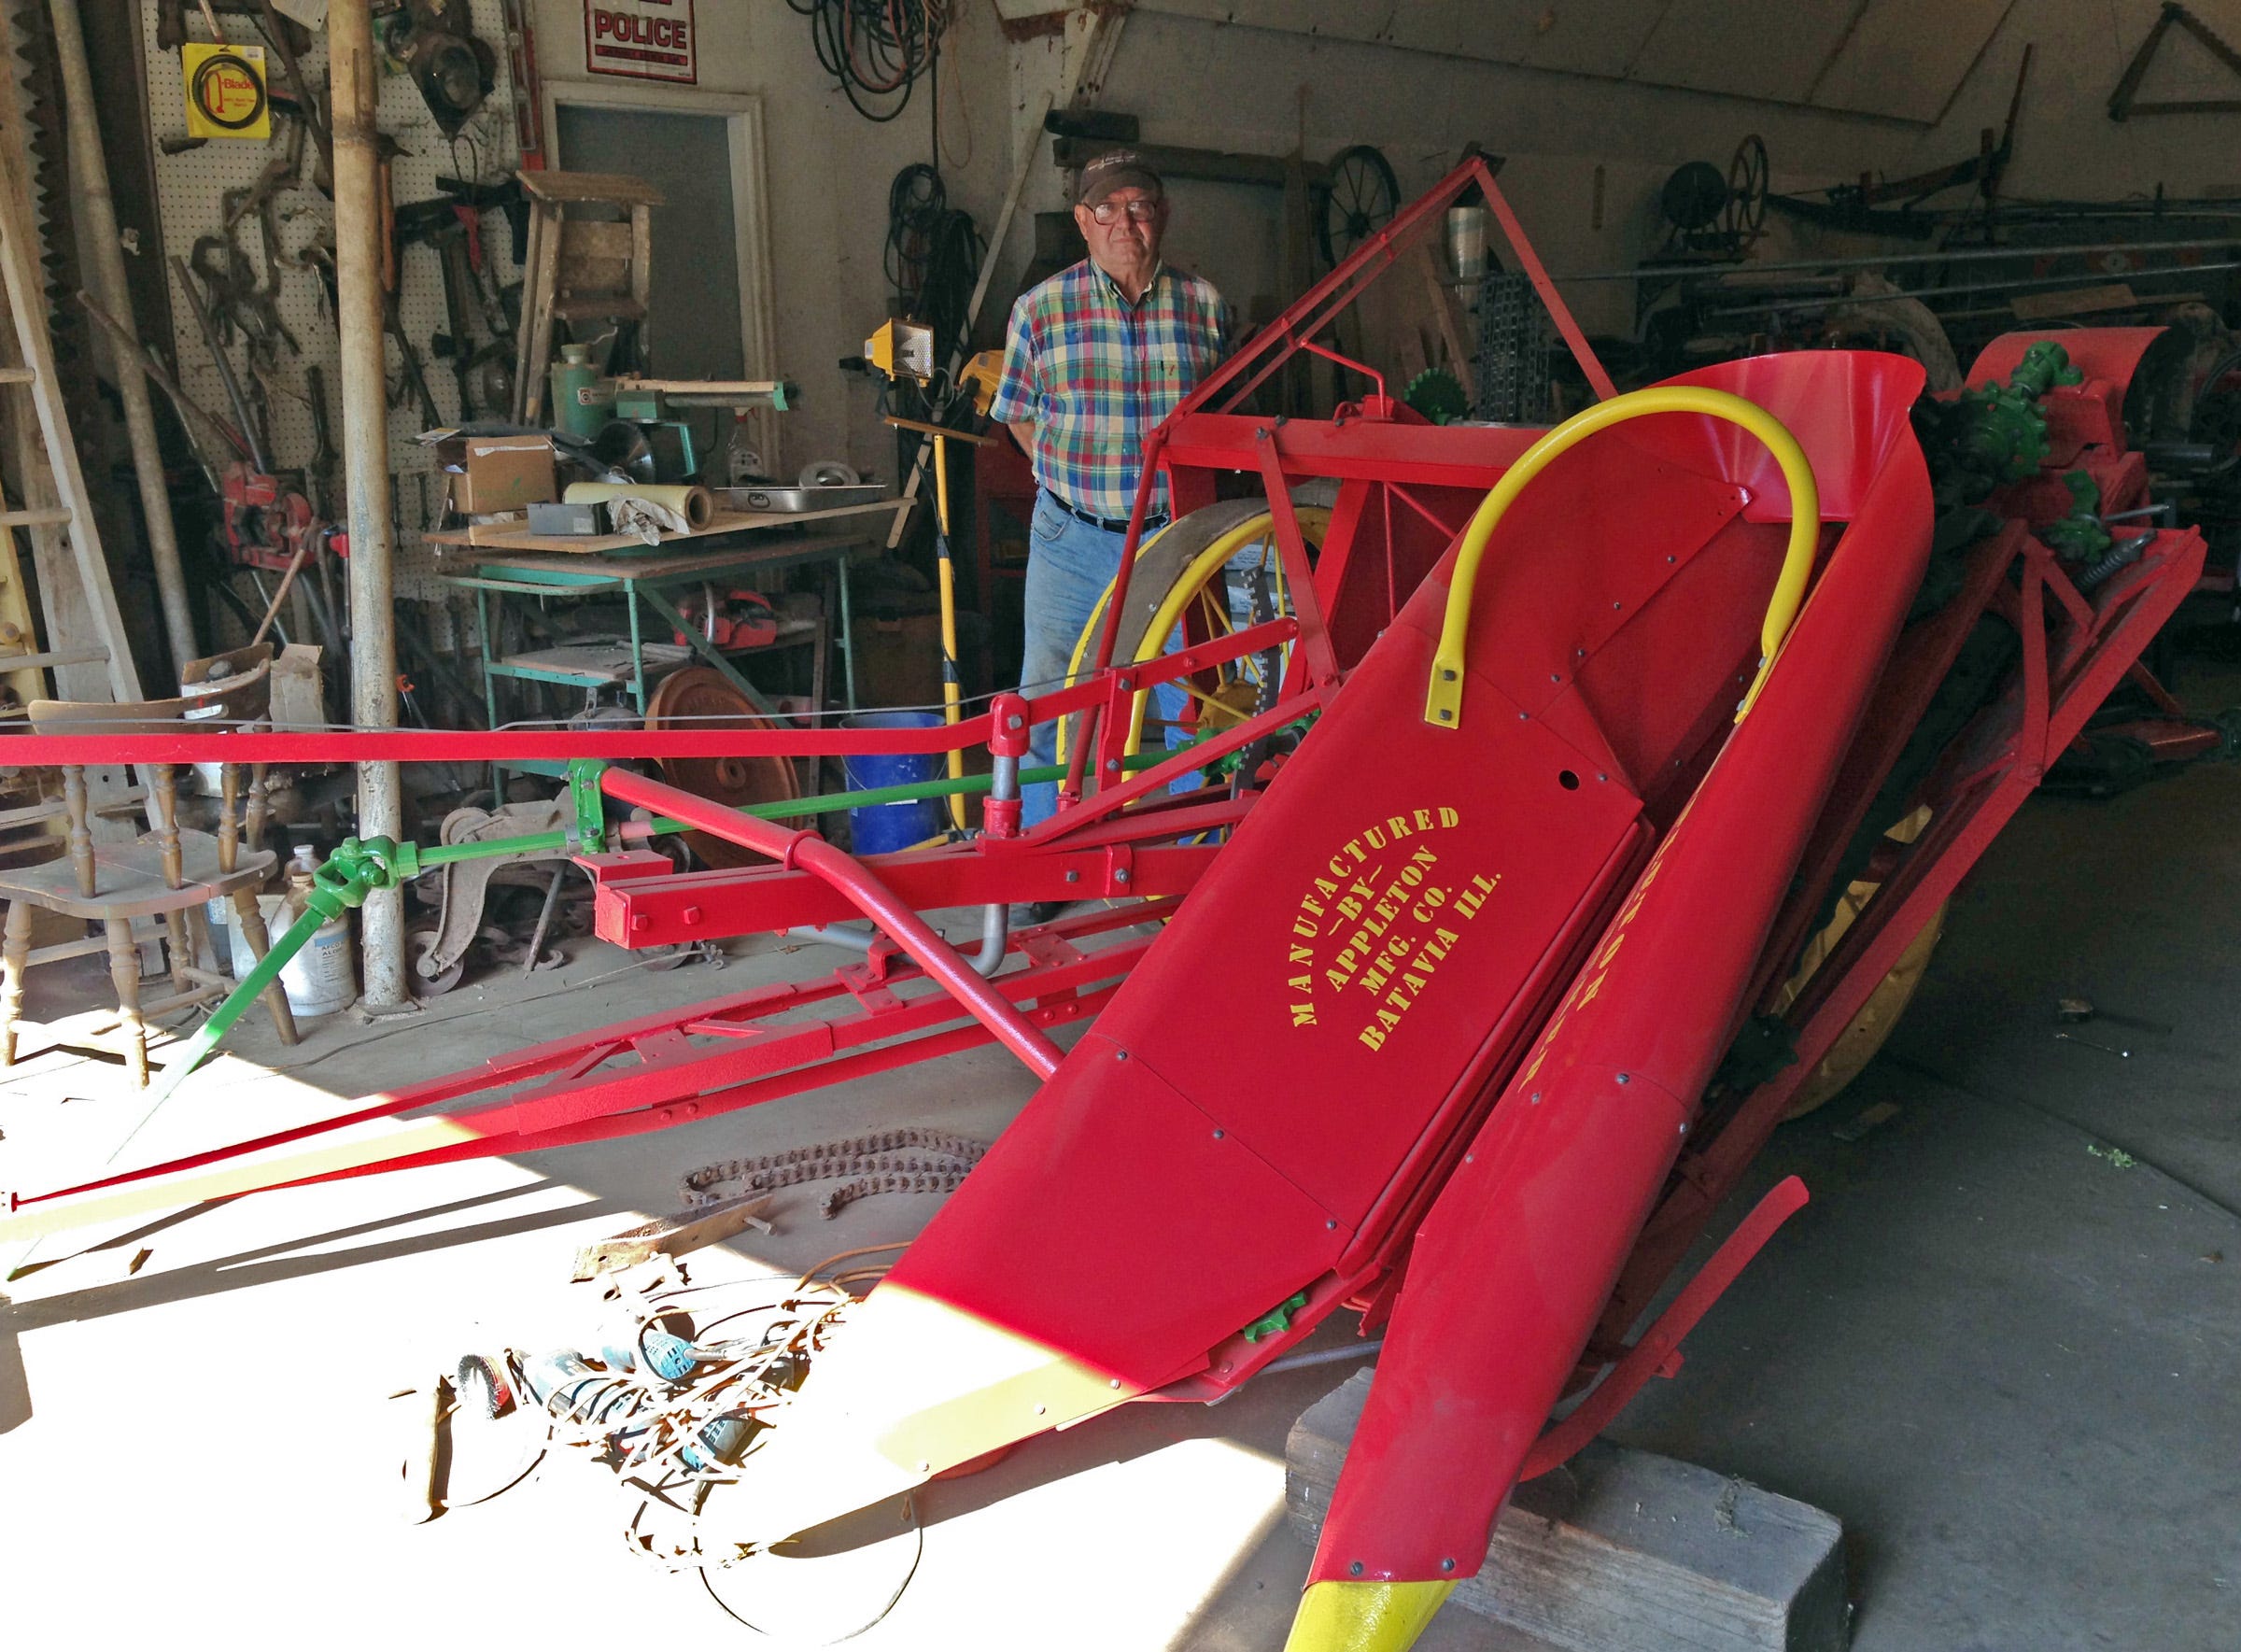 Dale Deno of Appleton, Wis., who collects Appleton Mfg. Co. equipment, even though the company founders moved to Illinois, was lucky enough to find an extremely rare picker in Illinois and has restored it.